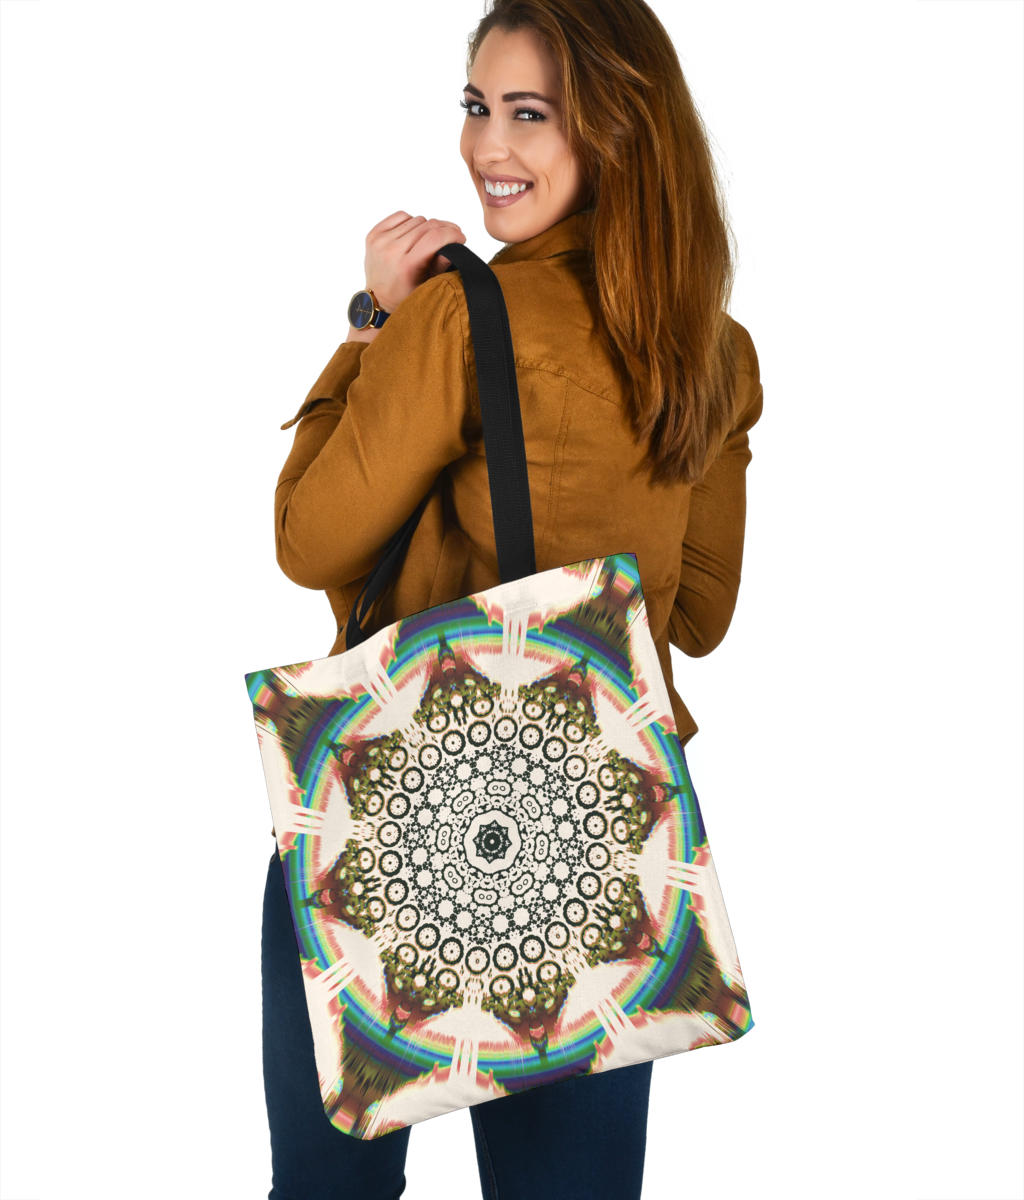 Variations on a Star: 9 | Tote Bag | Makroverset